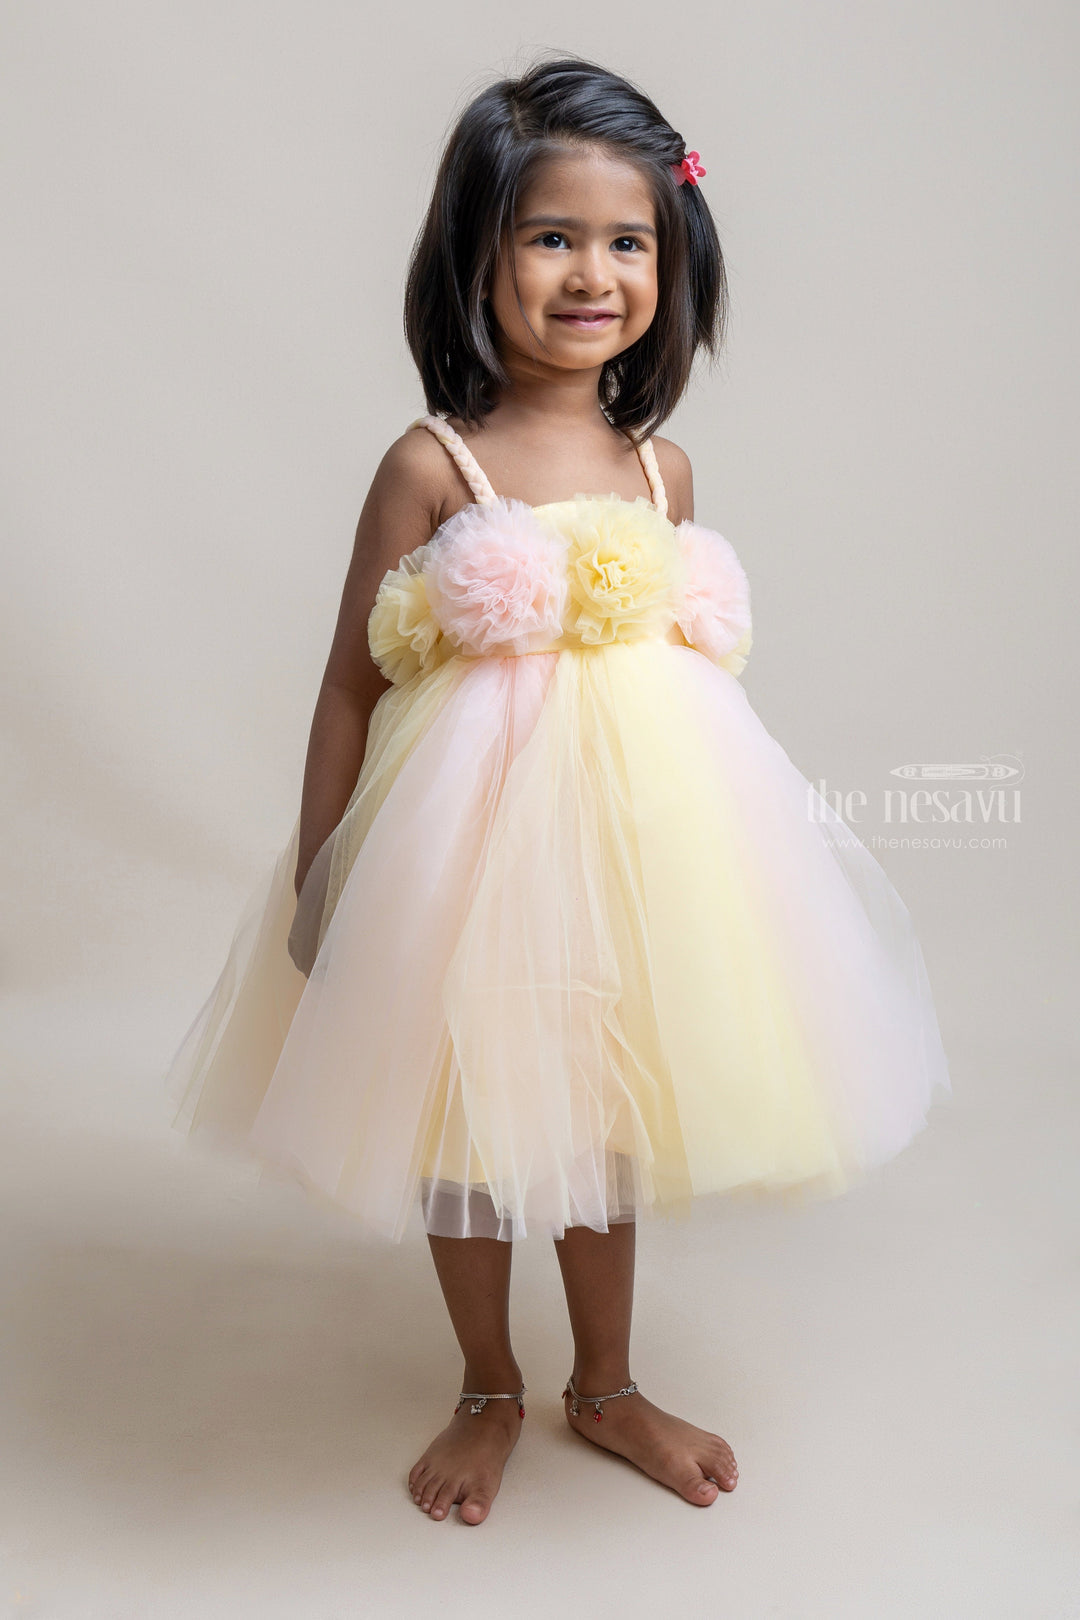 The Nesavu Girls Tutu Frock Lovely Pink And Yellow Puffed Floral Crafted Party Frock For Birthday Party Nesavu 16 (1Y) / Yellow PF116B-16 Lovely Pink Party Frock For Girls | Premium collection | The Nesavu